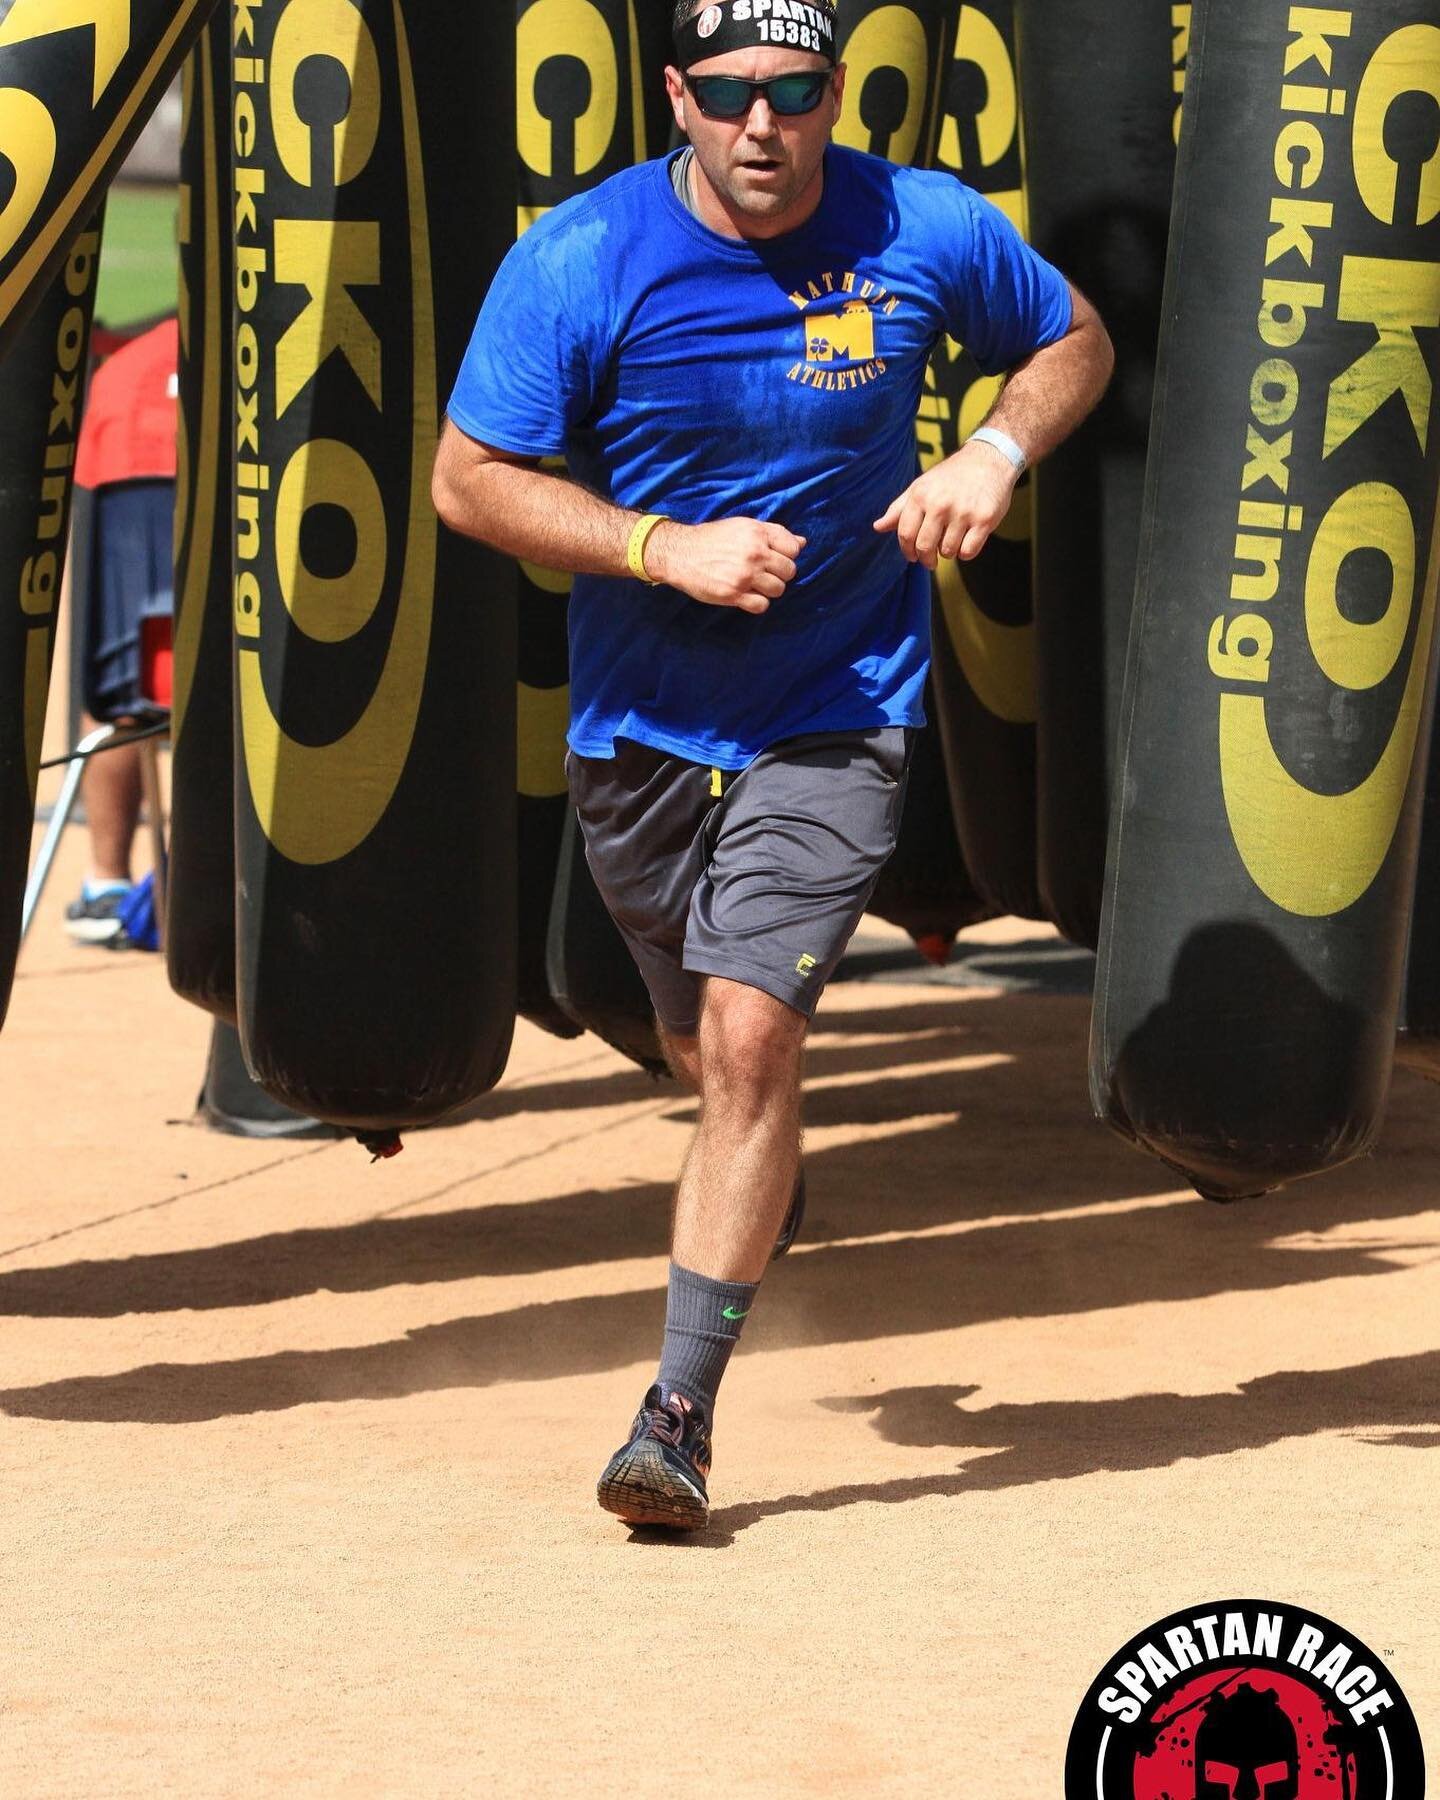 #throwbackthursday 

Spartan sprint in Philly 2017- I'm still sore.

Keep running!

#crisismanagement #emergencymanagement #resilience #businesscontinuity #unconquerablebook